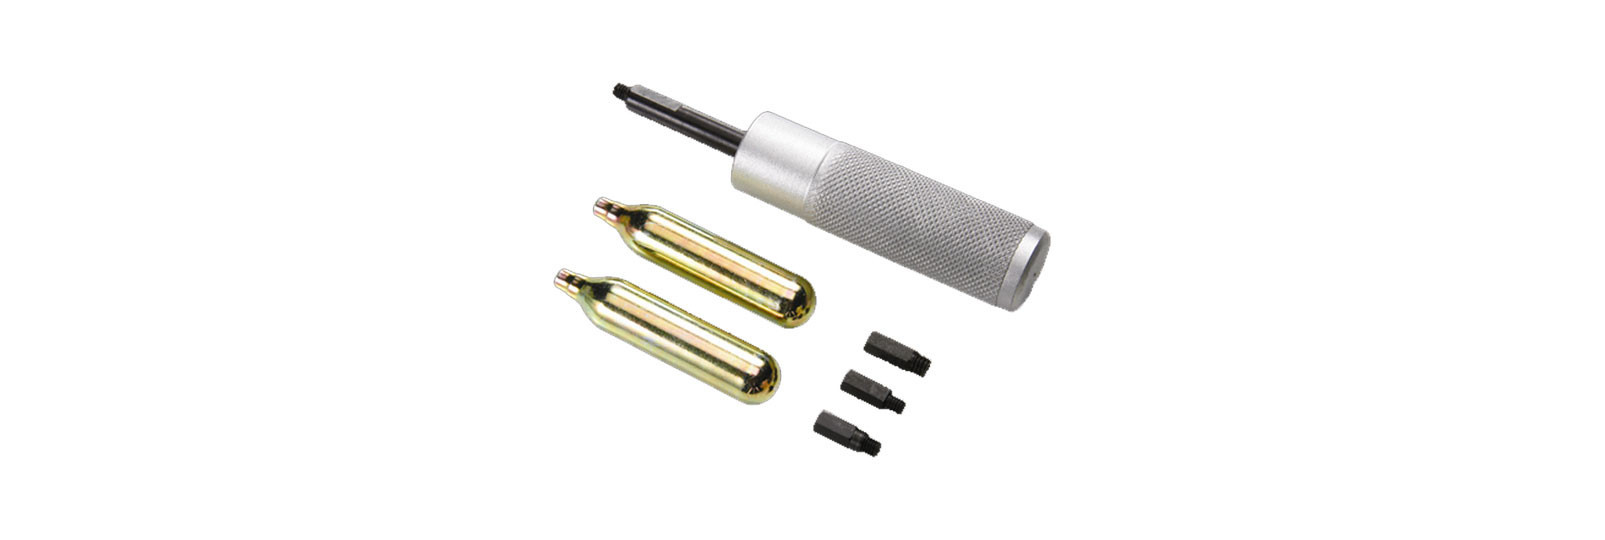 Fast bullets puller with CO2 gas bottles